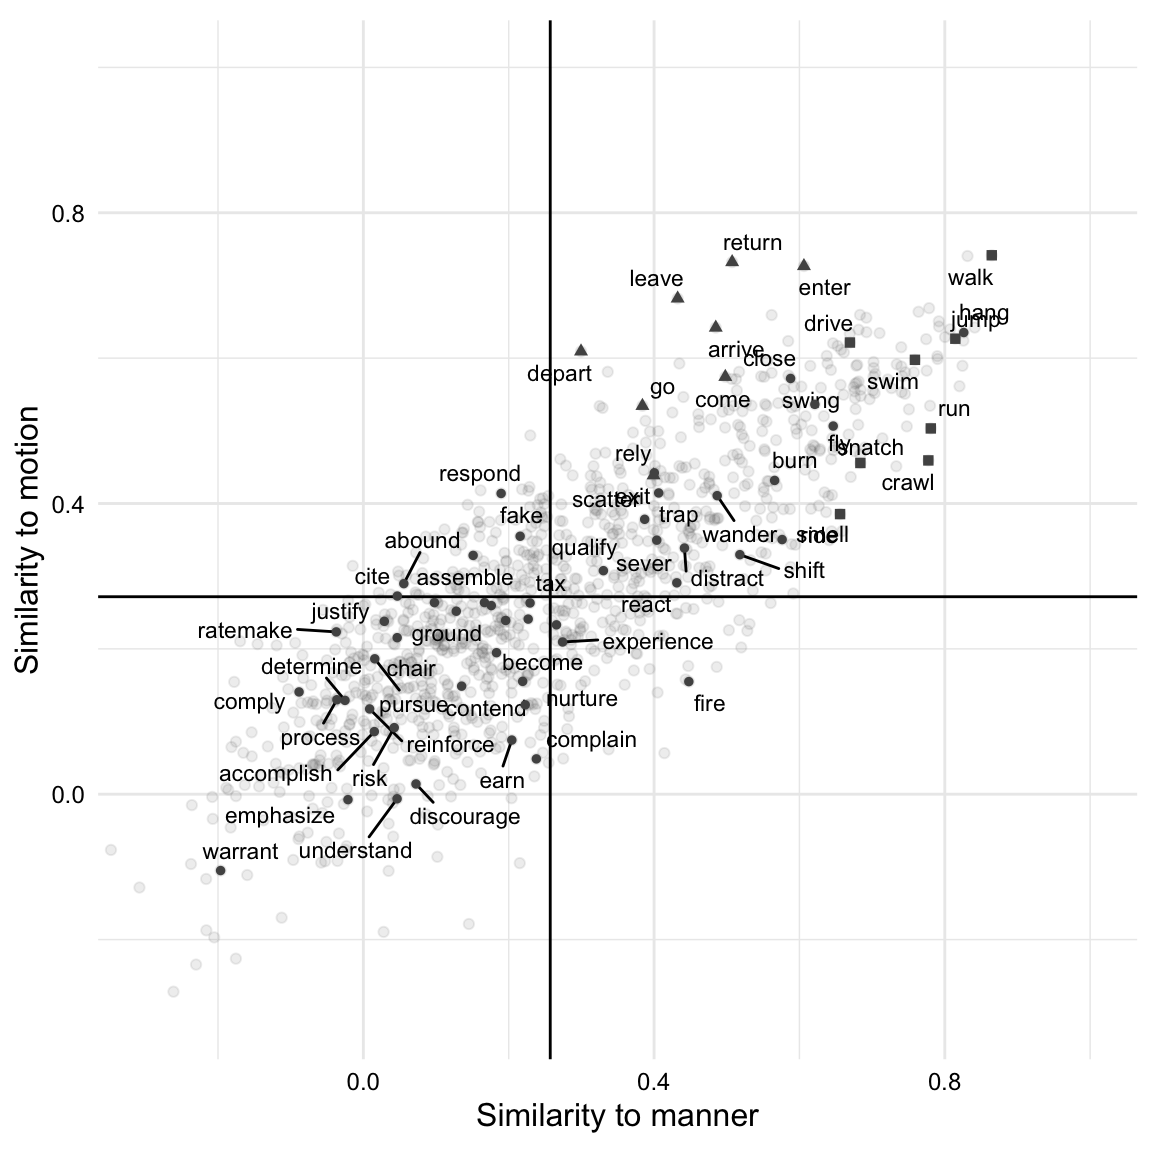 A scatter plot showing the motion-similarity and manner-similarity of verbs in the MASC dataset. The plot shows the similarity to motion on the x-axis and the similarity to manner on the y-axis. The plot shows the motion-similarity and manner-similarity of 50 randomly sampled verbs from the dataset, as well as the motion and manner seed vectors.